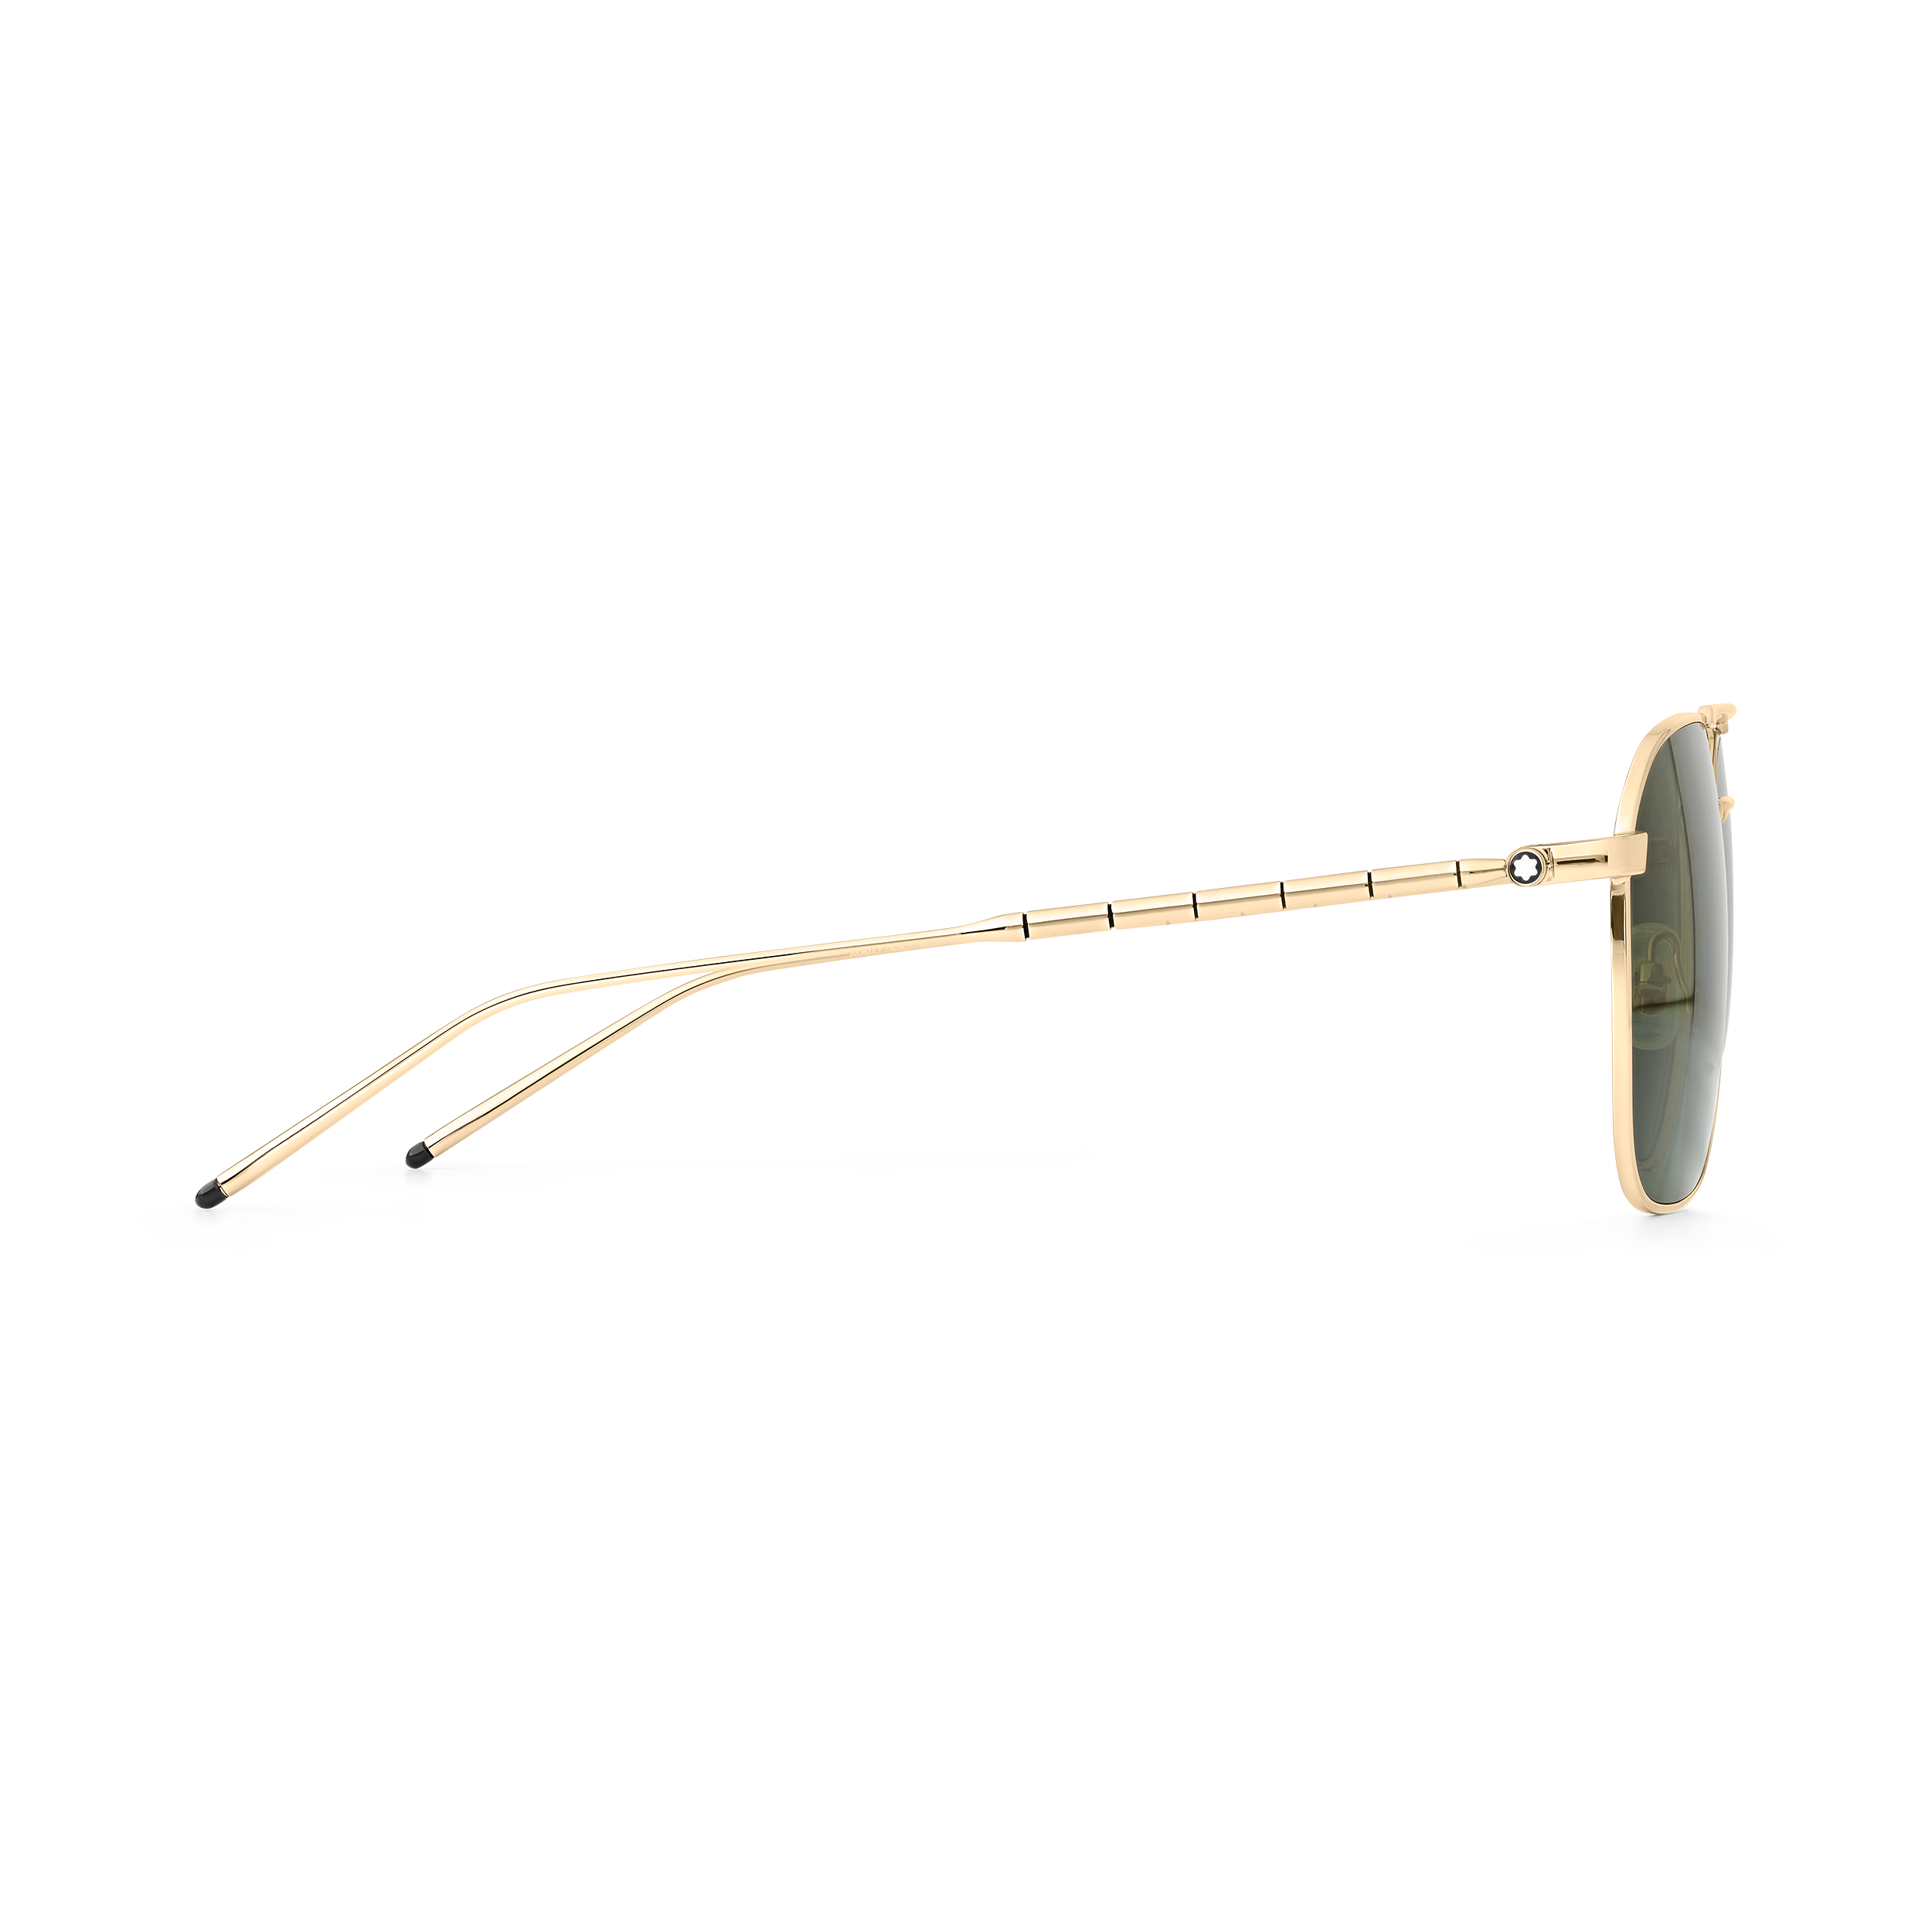 Rectangular Sunglasses with Gold-Colored Metal Frame, image 2